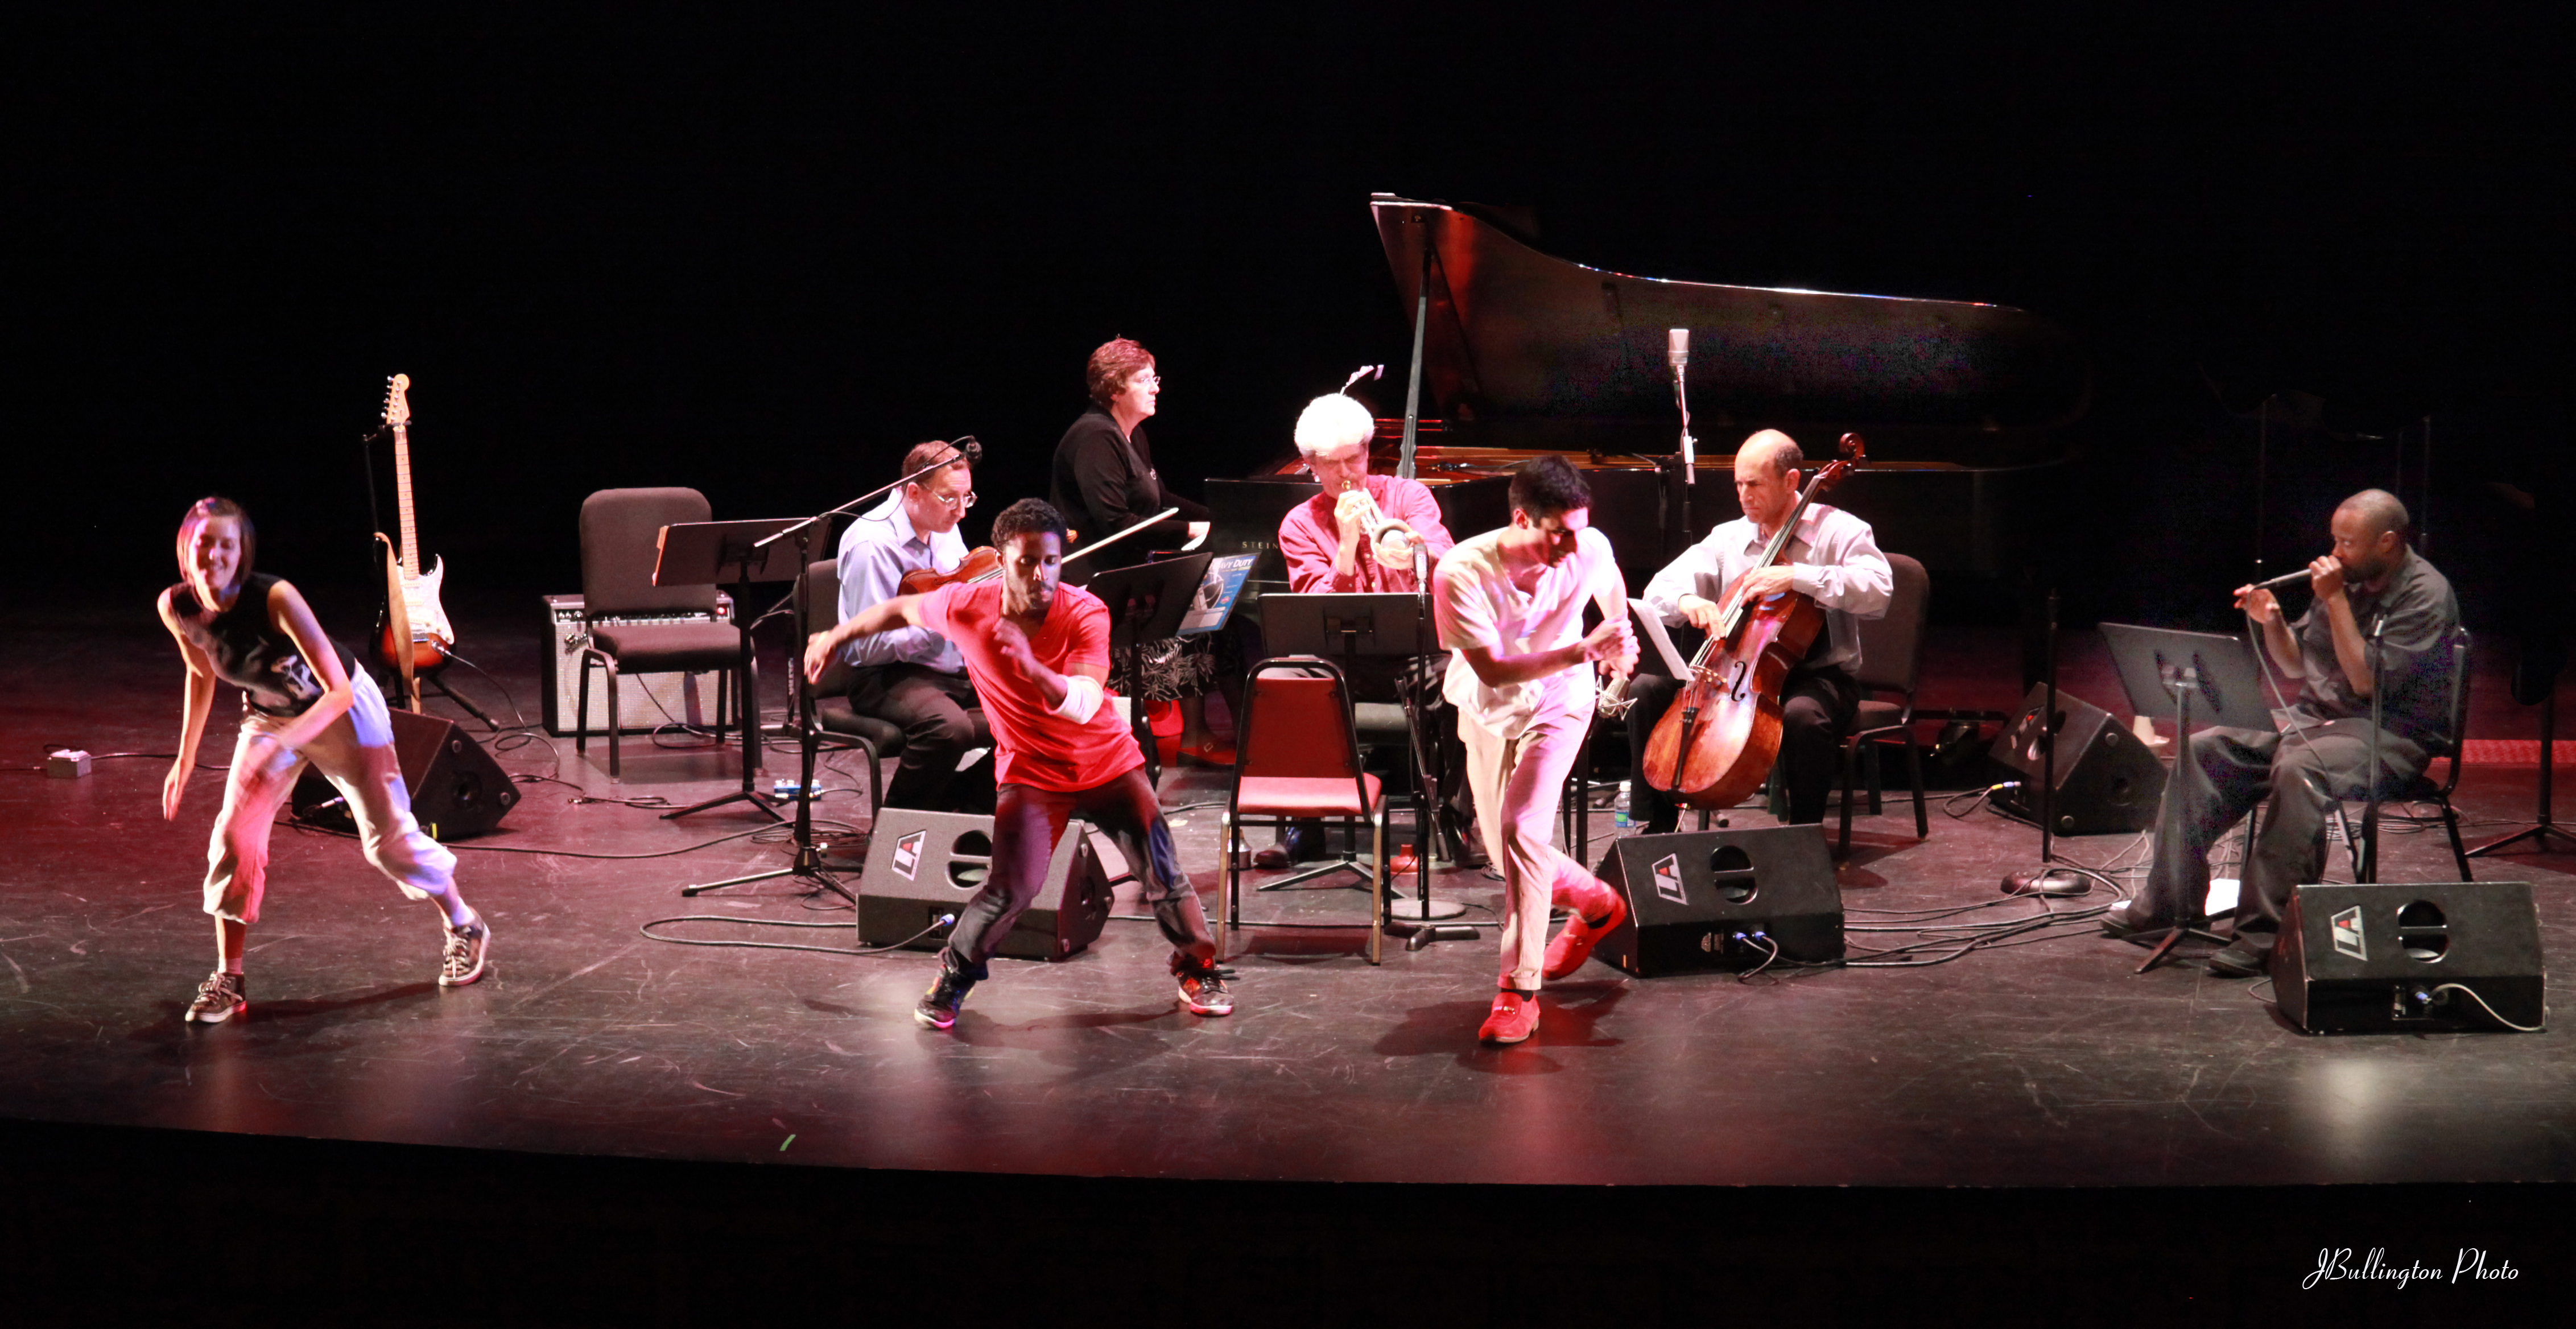 Kandinsky Beat Down performs on stage